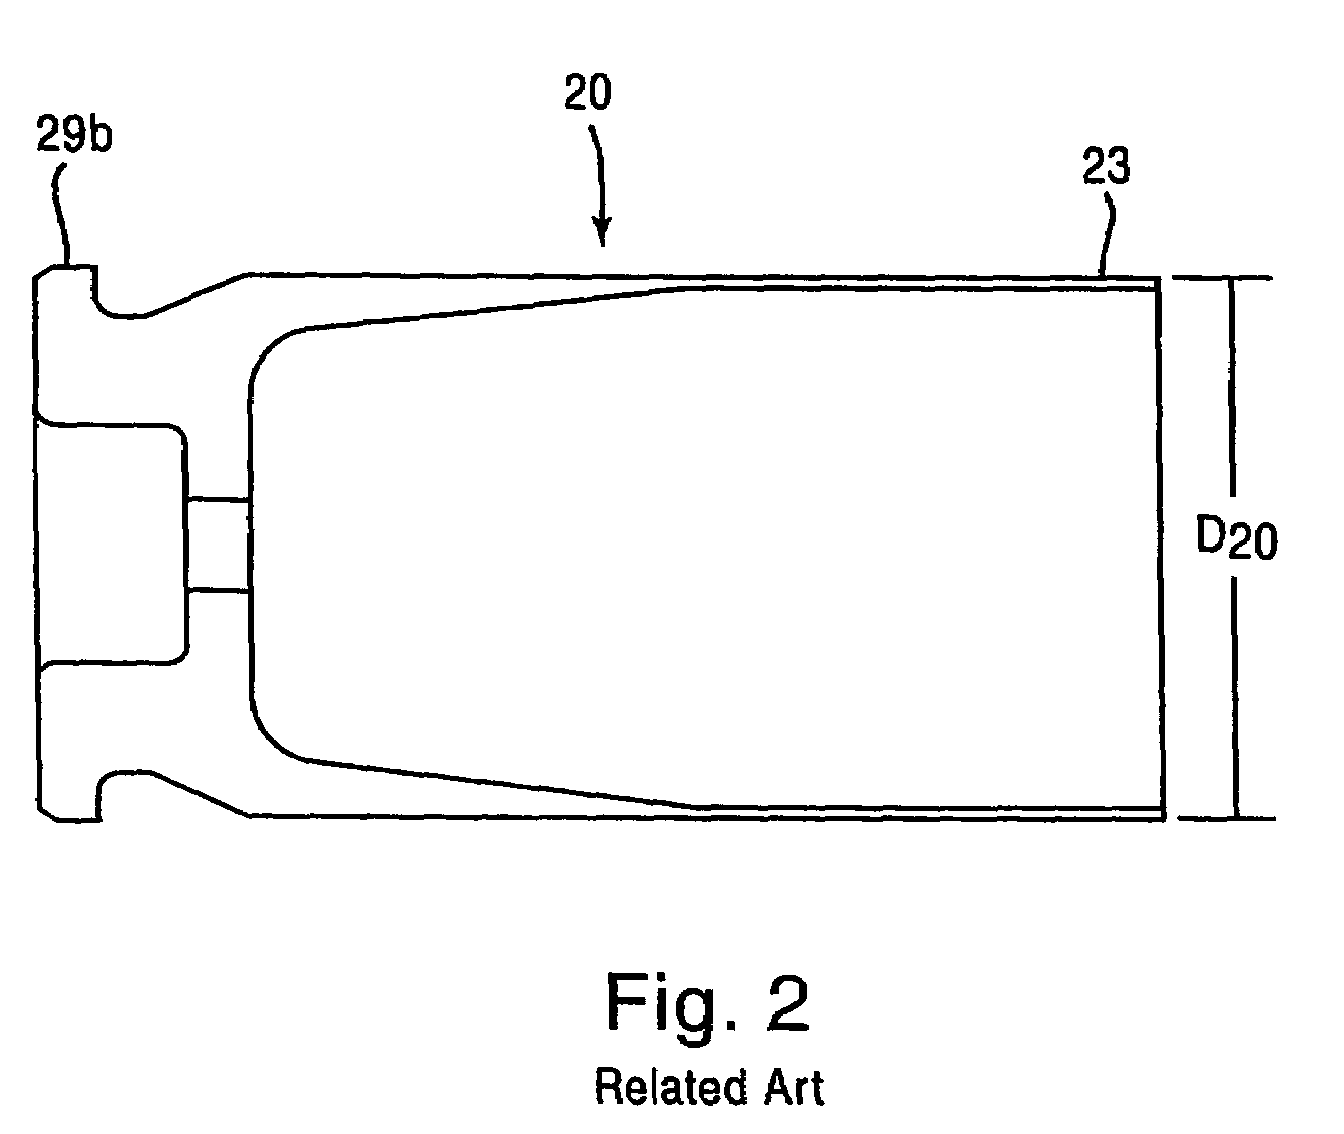 Composite polymer based cartridge case having an overmolded metal cup, polymer plug base assembly